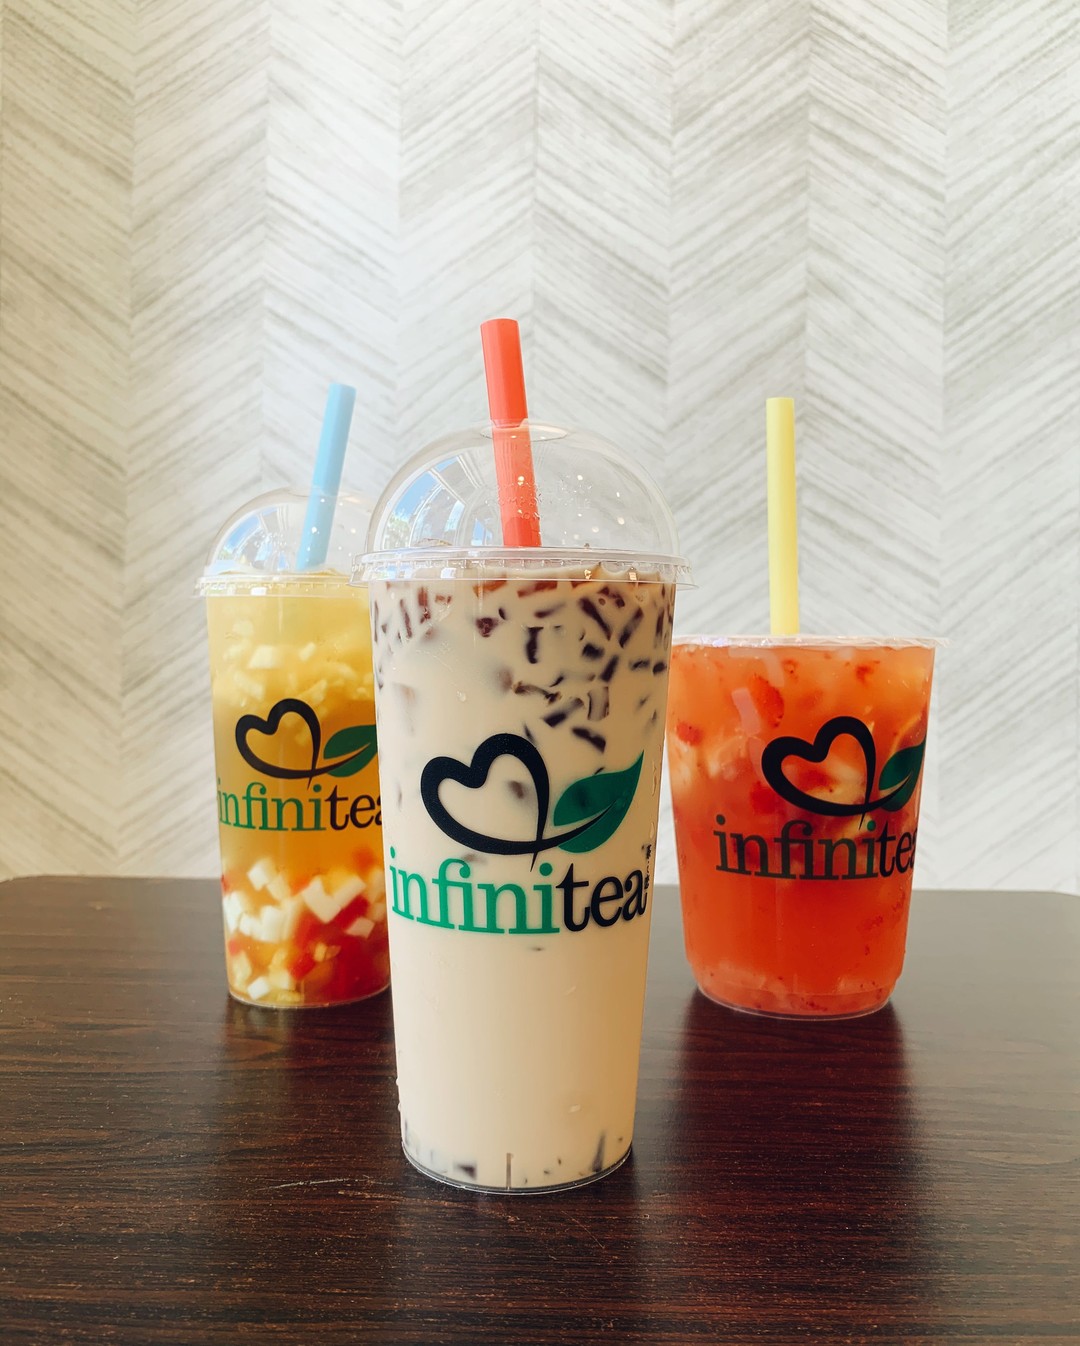 Say hello to our new friends at @infinitea_hi, open today with more boba tea flavor possibilities than we can count—like milk tea with brown sugar jelly, plantation fruit tea with rainbow jelly, strawberry lemonade with lychee jelly (all pictured here). 🍋️ Next to @mailesthai_ward on Auahi Street.